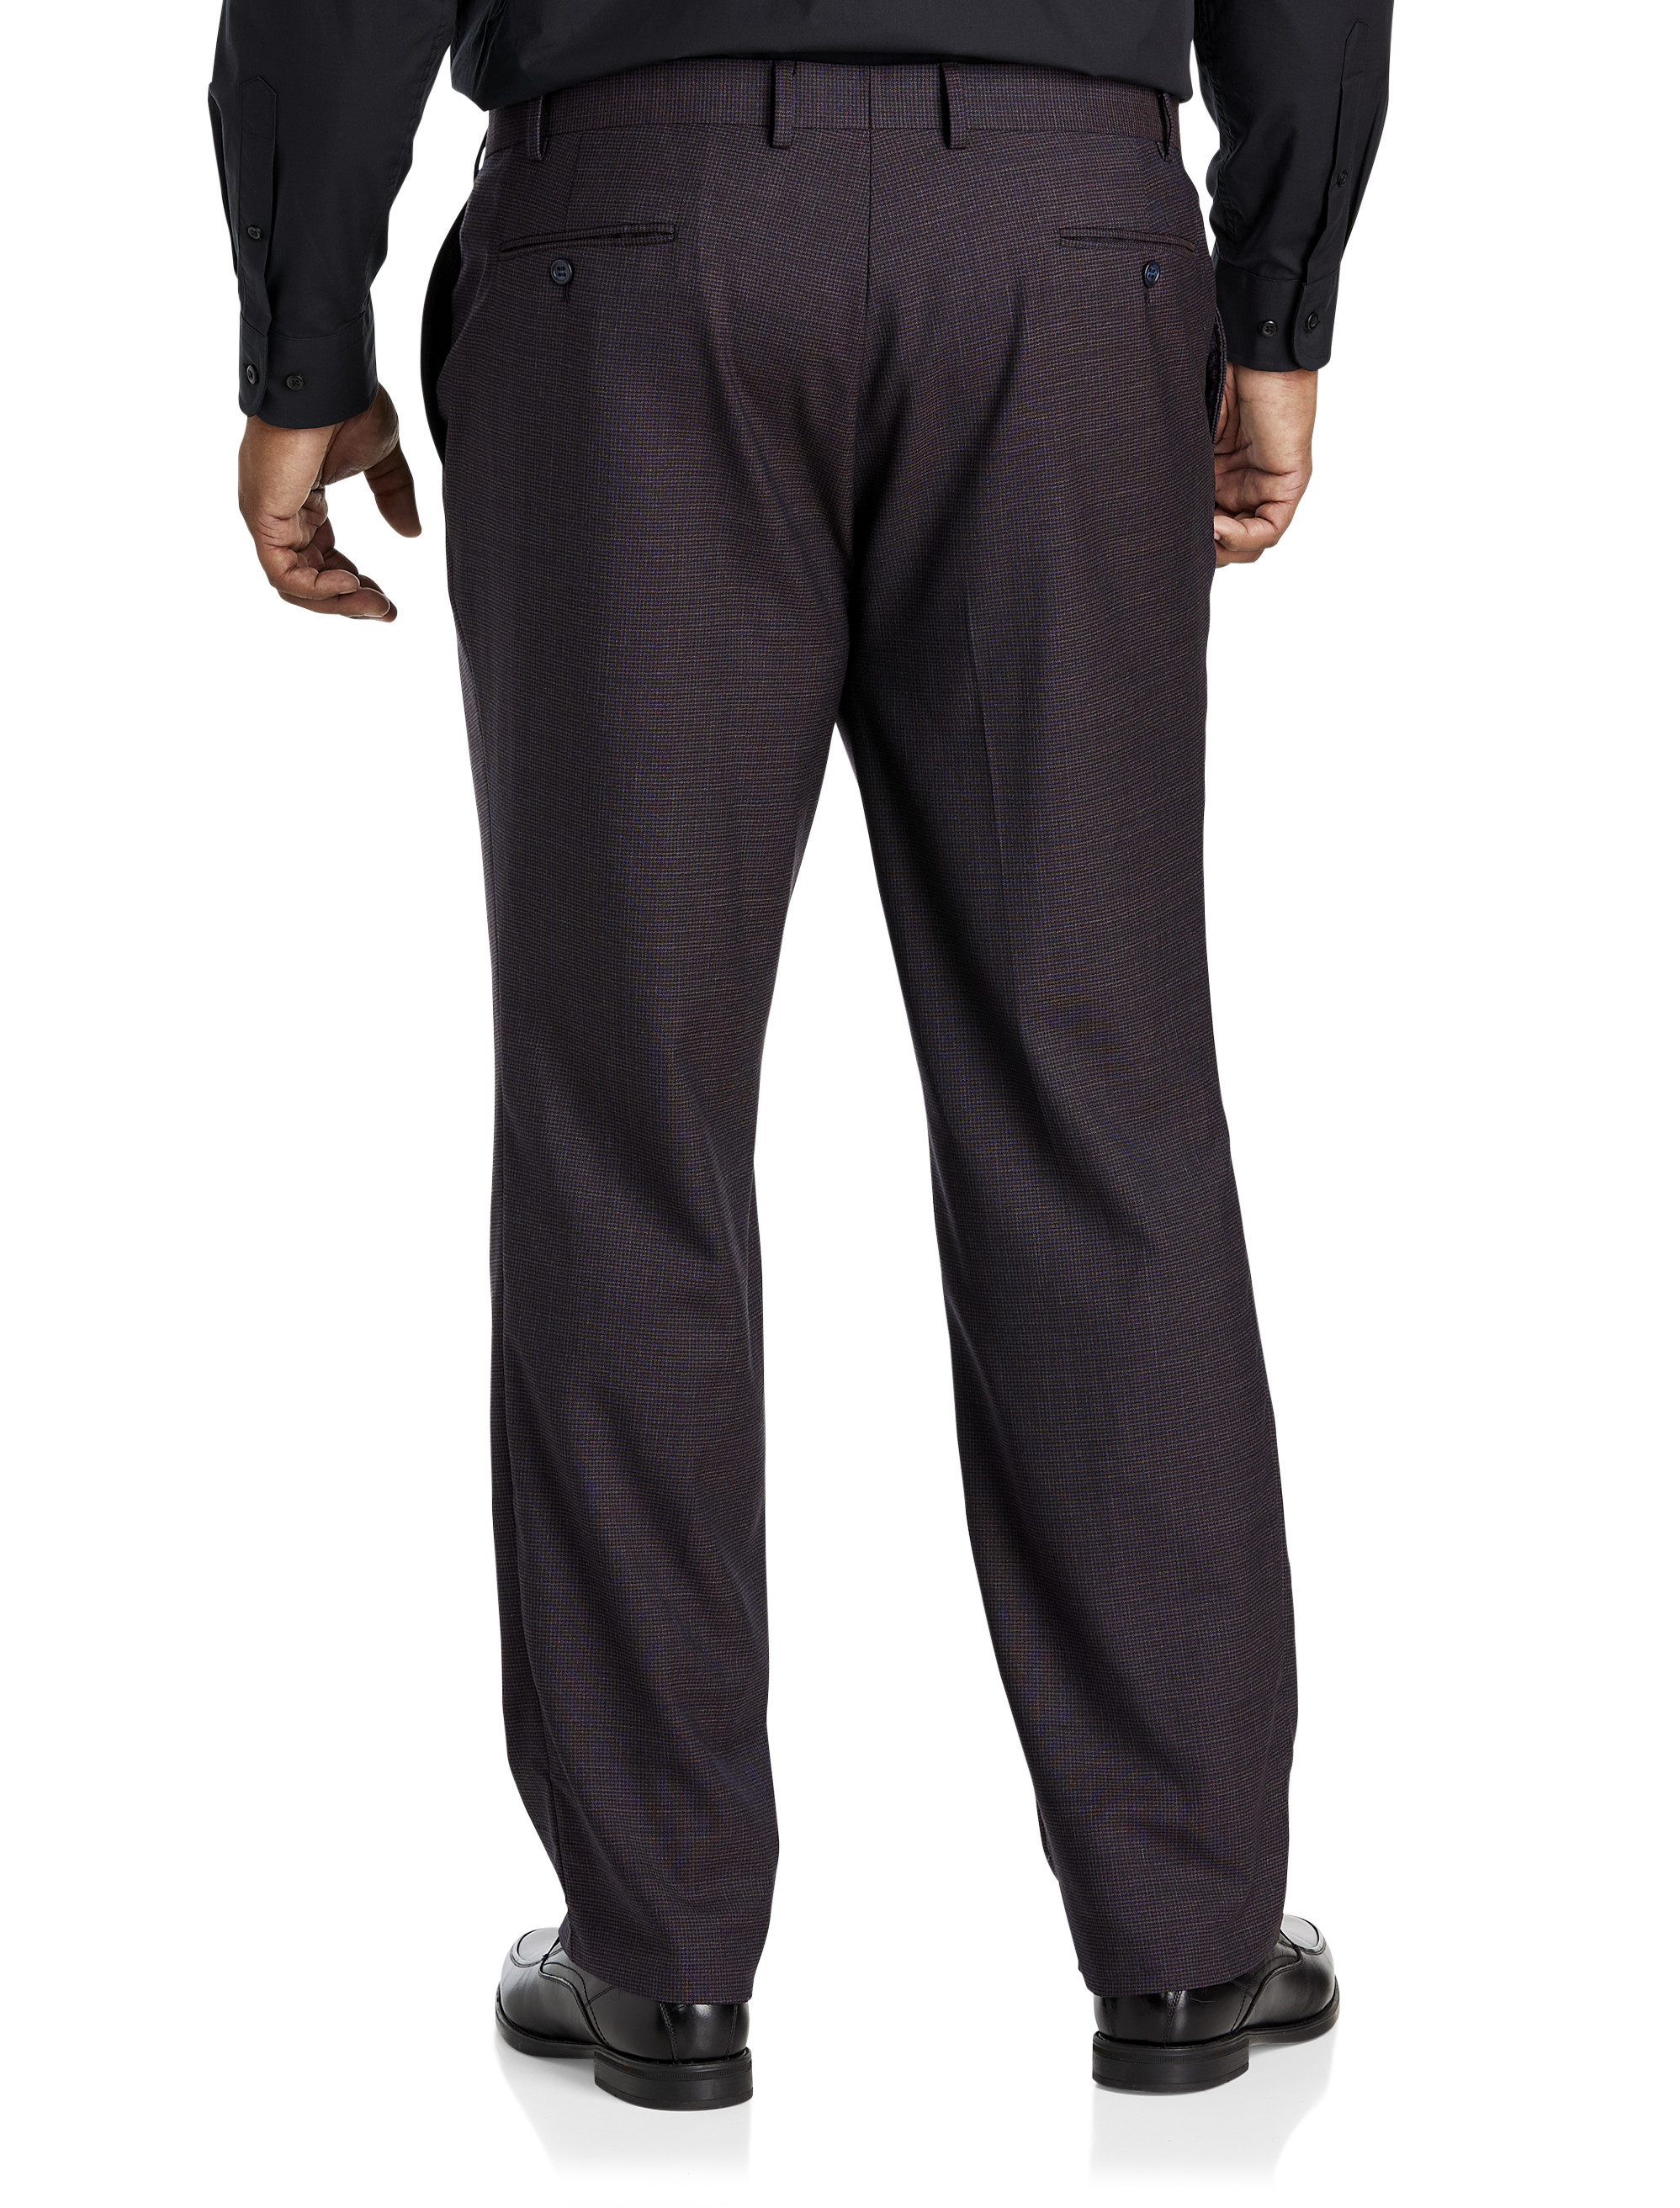 Houndstooth Suit Pants